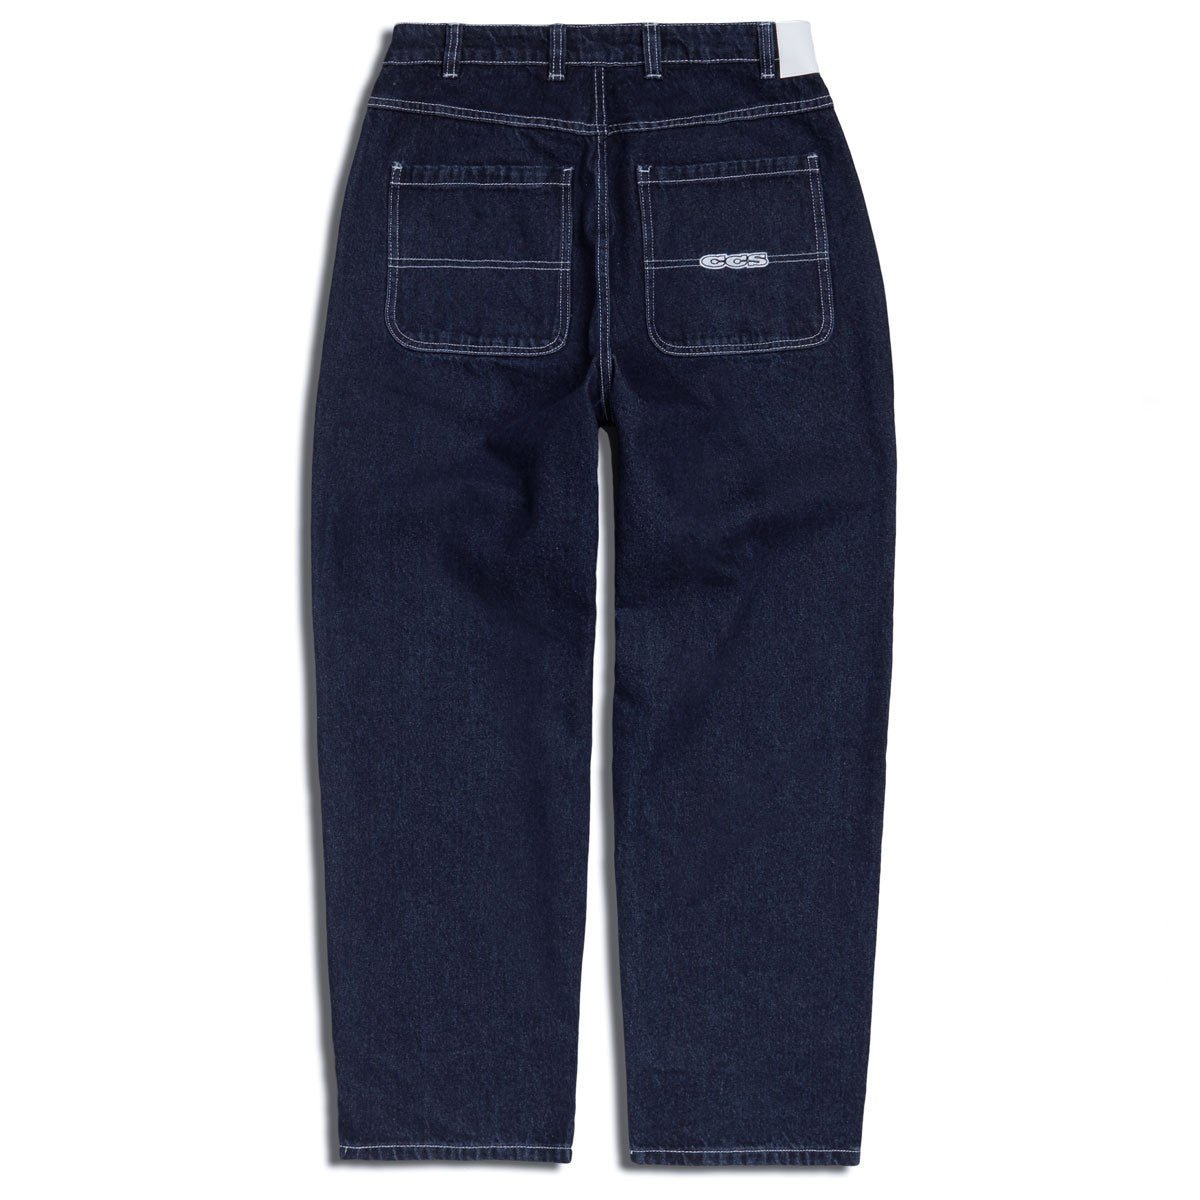 CCS Baggy Taper Denim Jeans - Overdyed Navy image 5